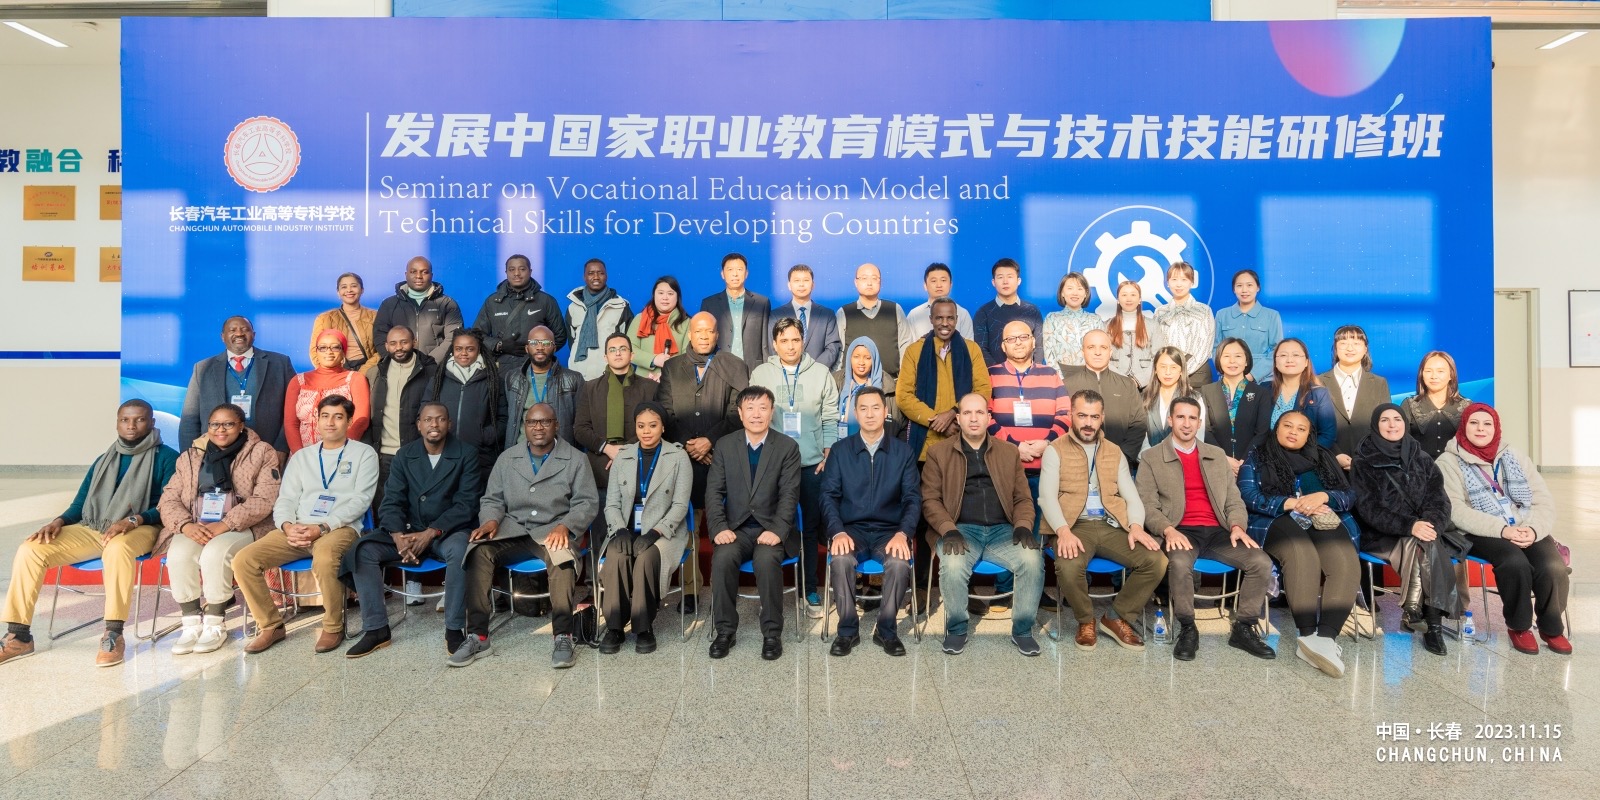 Representative of NBTE at the Seminar for Vocational Education Model and Technical Skills for Developing Countries held at Shanghai China